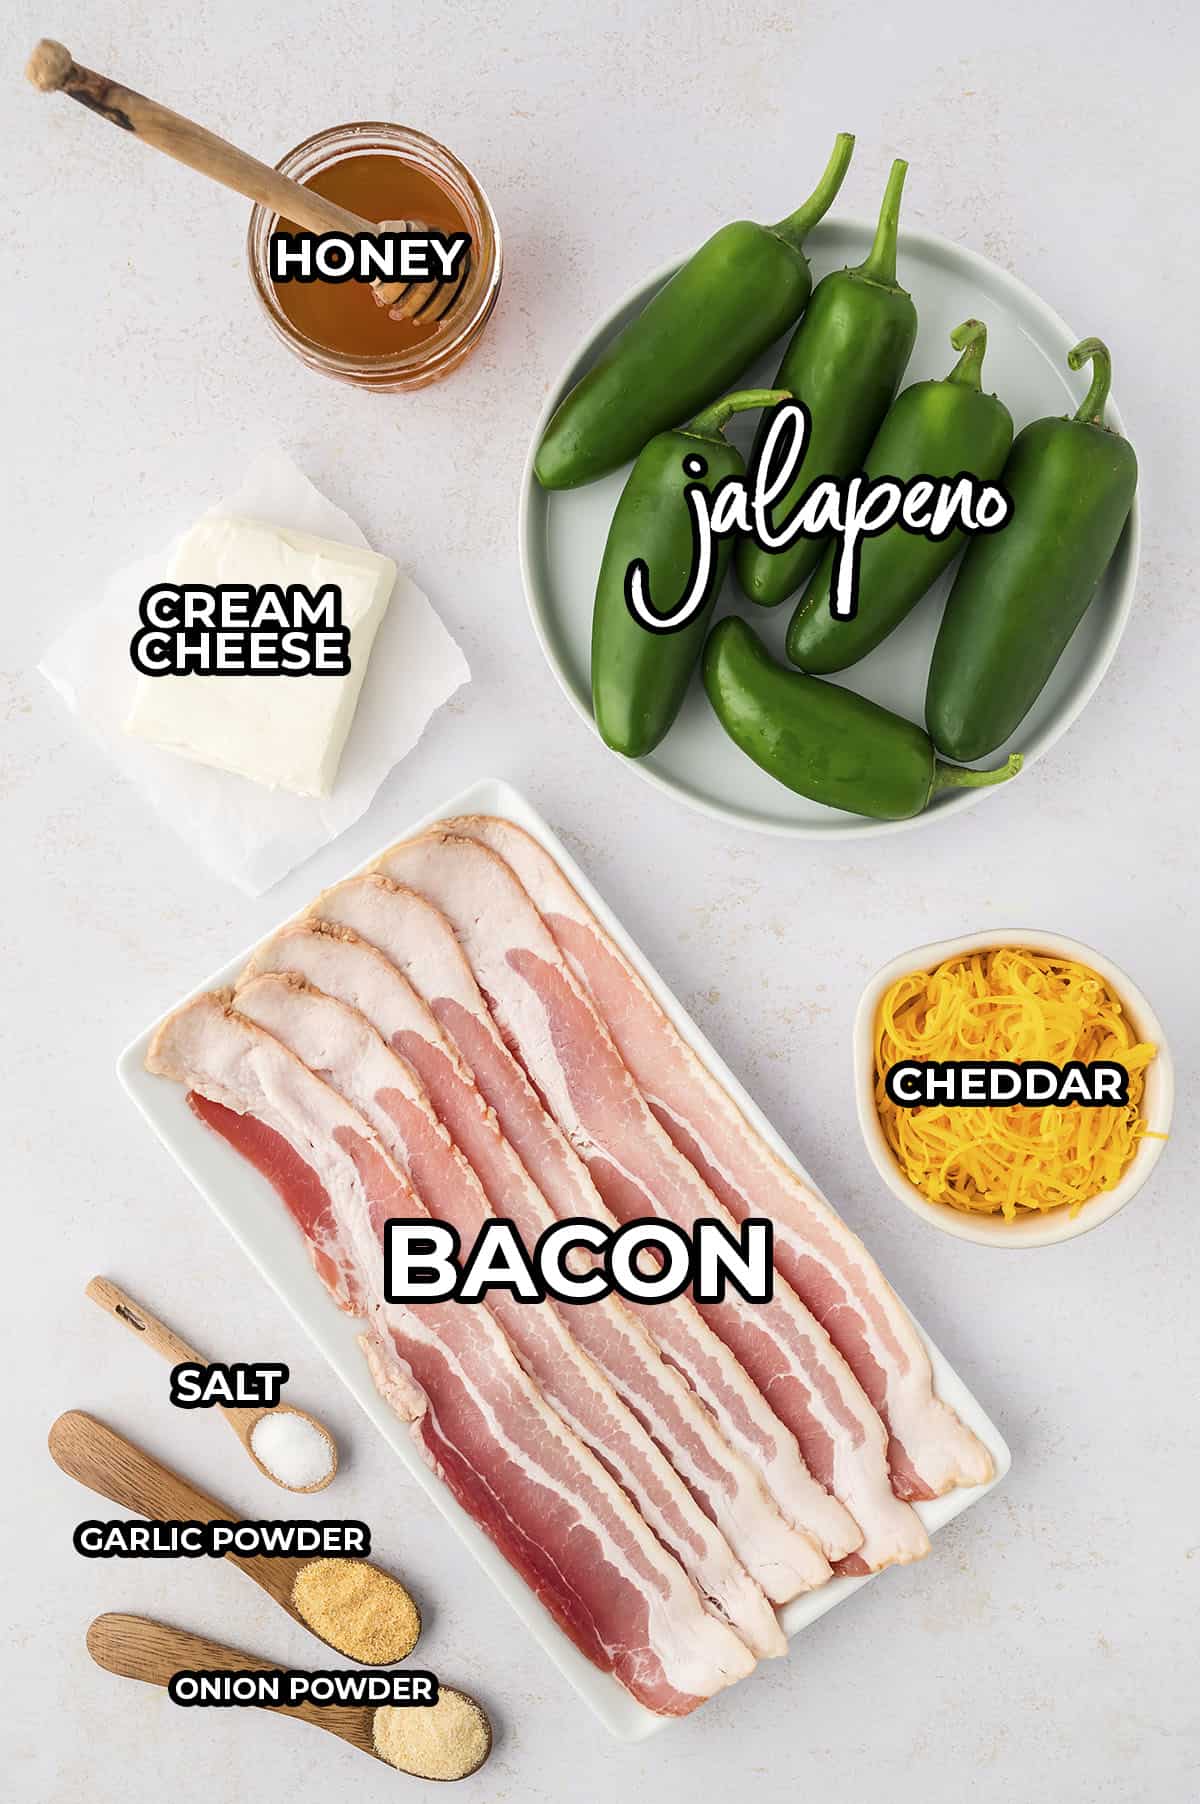 Ingredients for jalapeno poppers recipe.